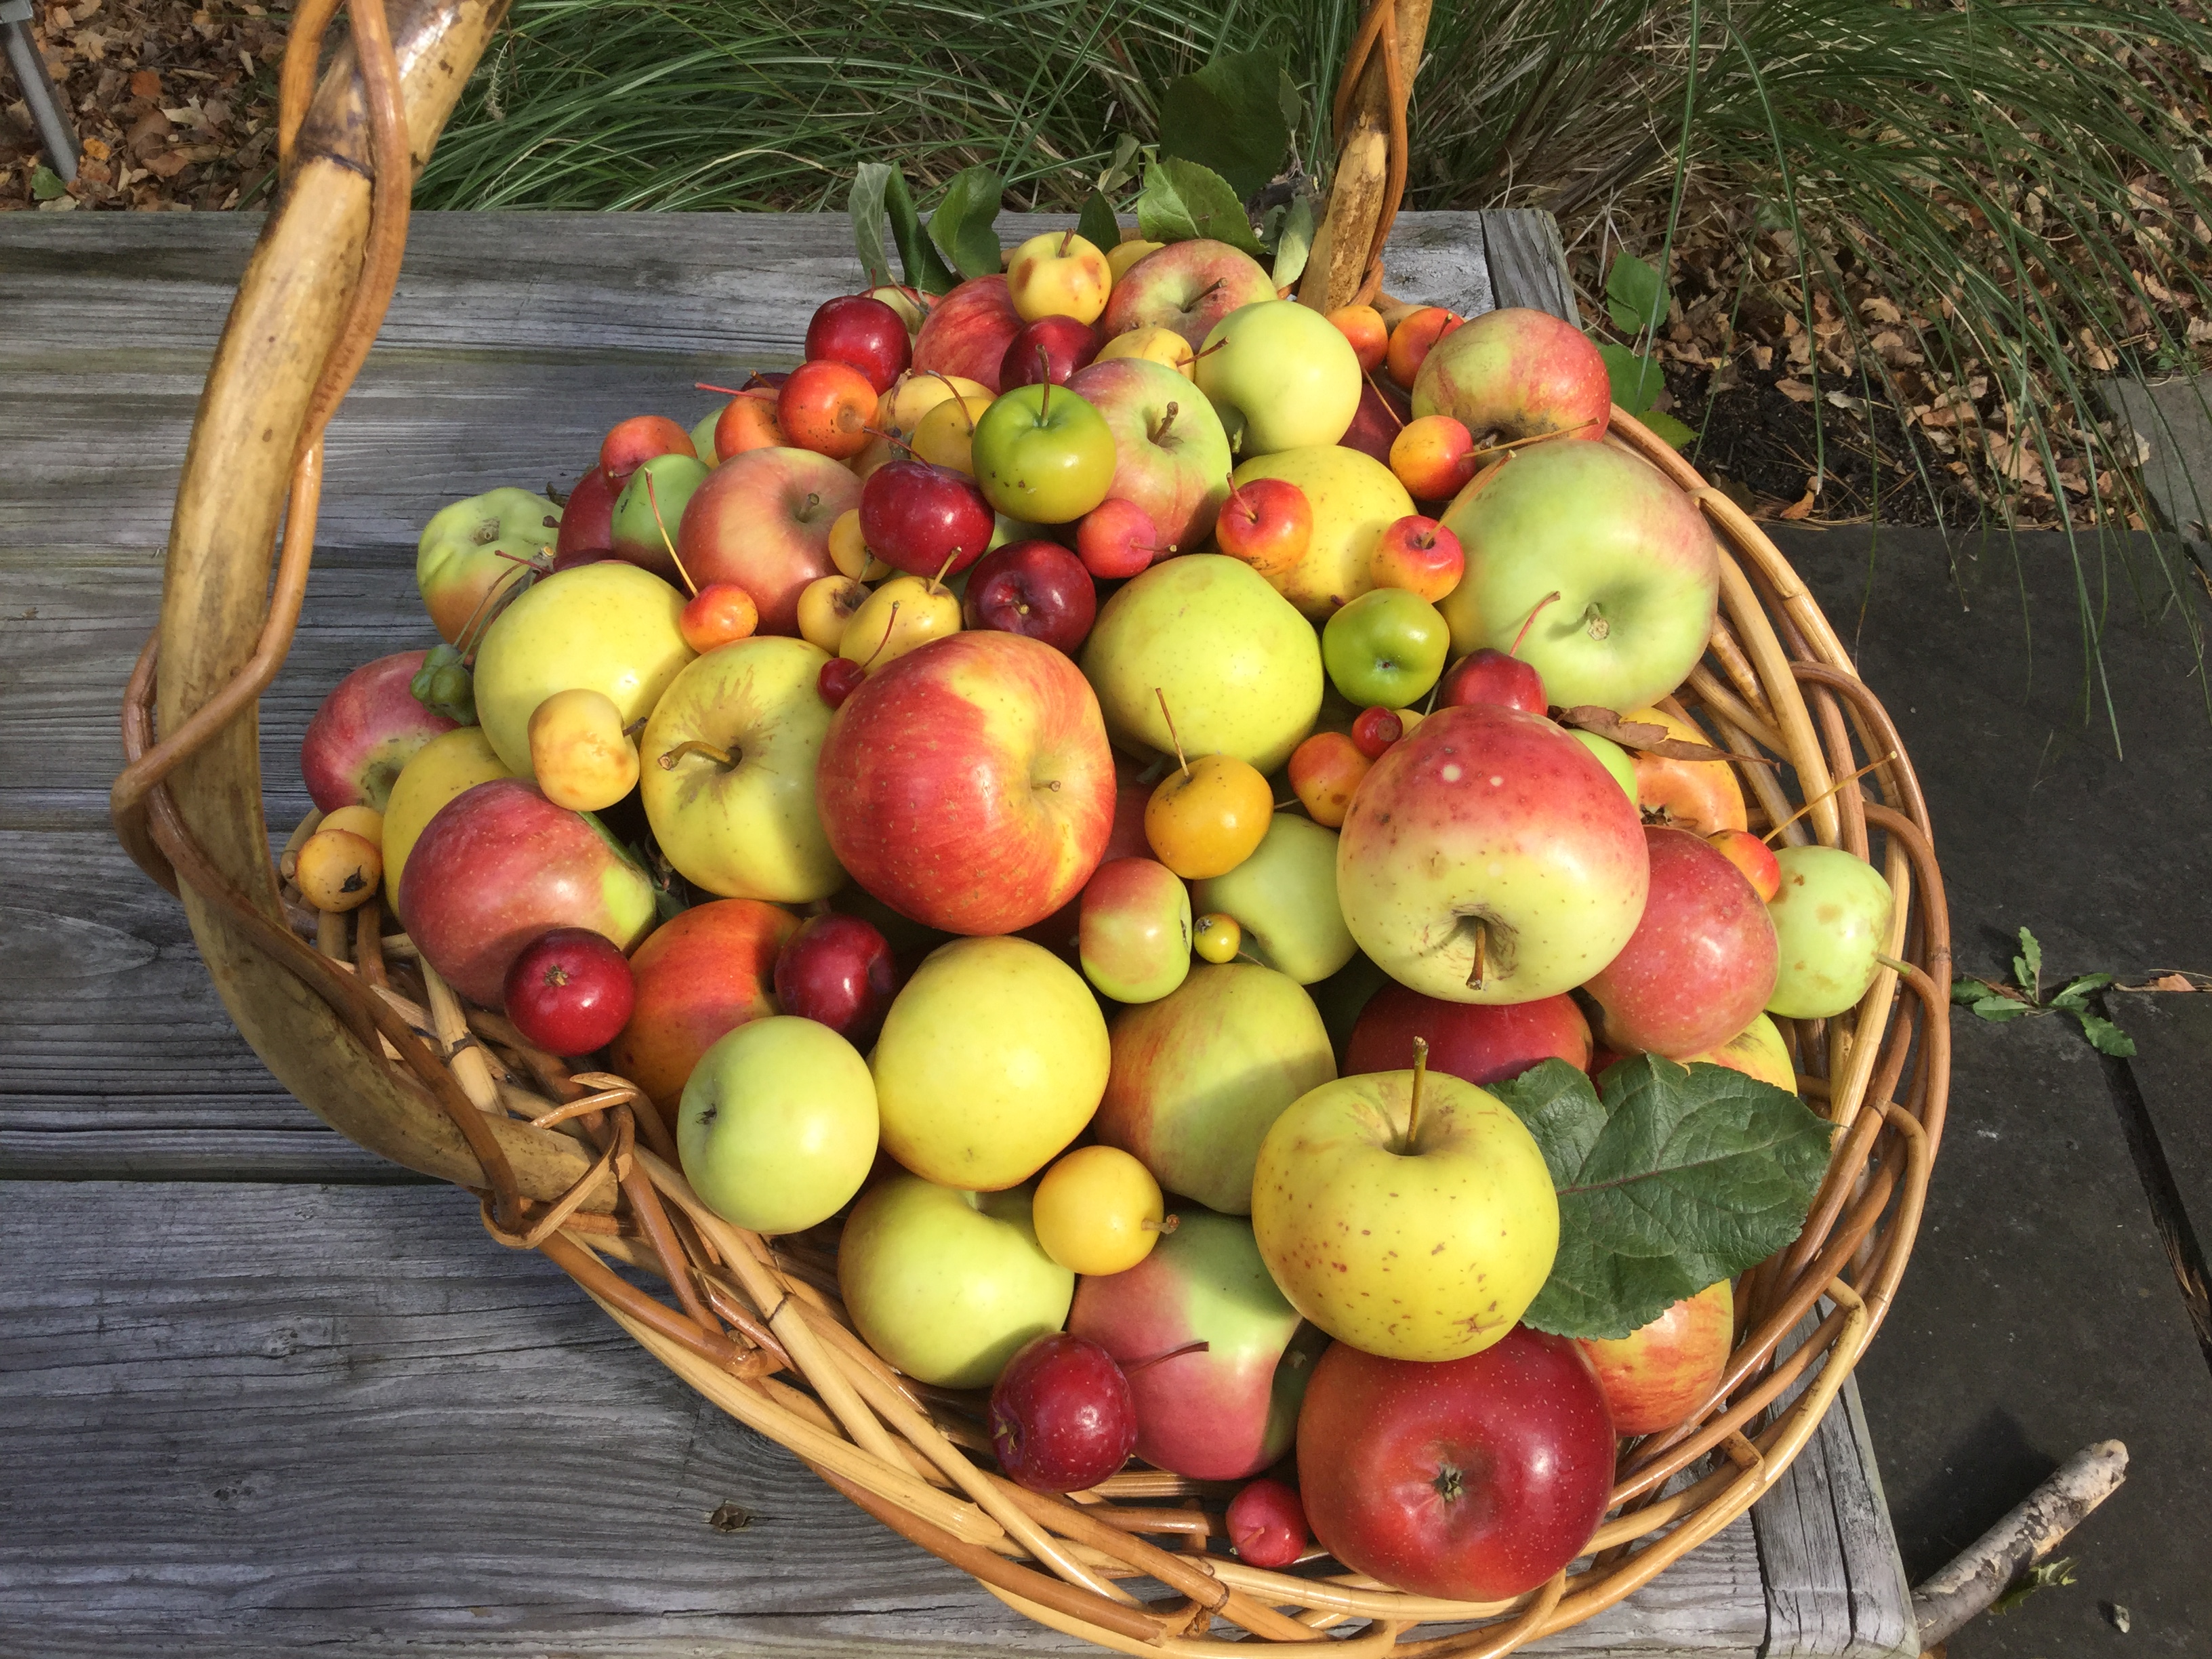 Opal Apples In Stores Pt 3 - AG INFORMATION NETWORK OF THE WEST